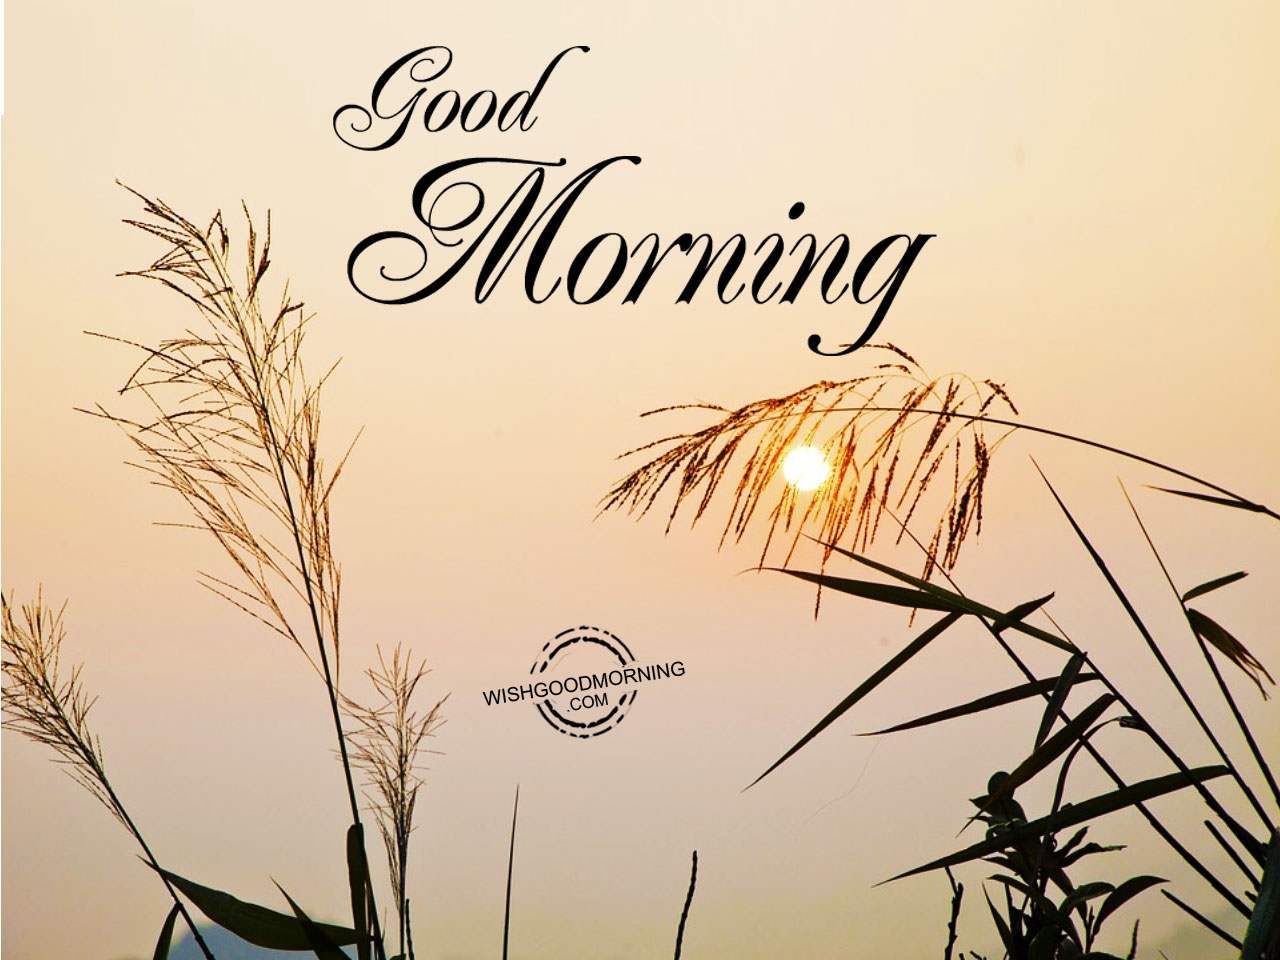 Good Morning – Happy Day - Good Morning Pictures – WishGoodMorning.com